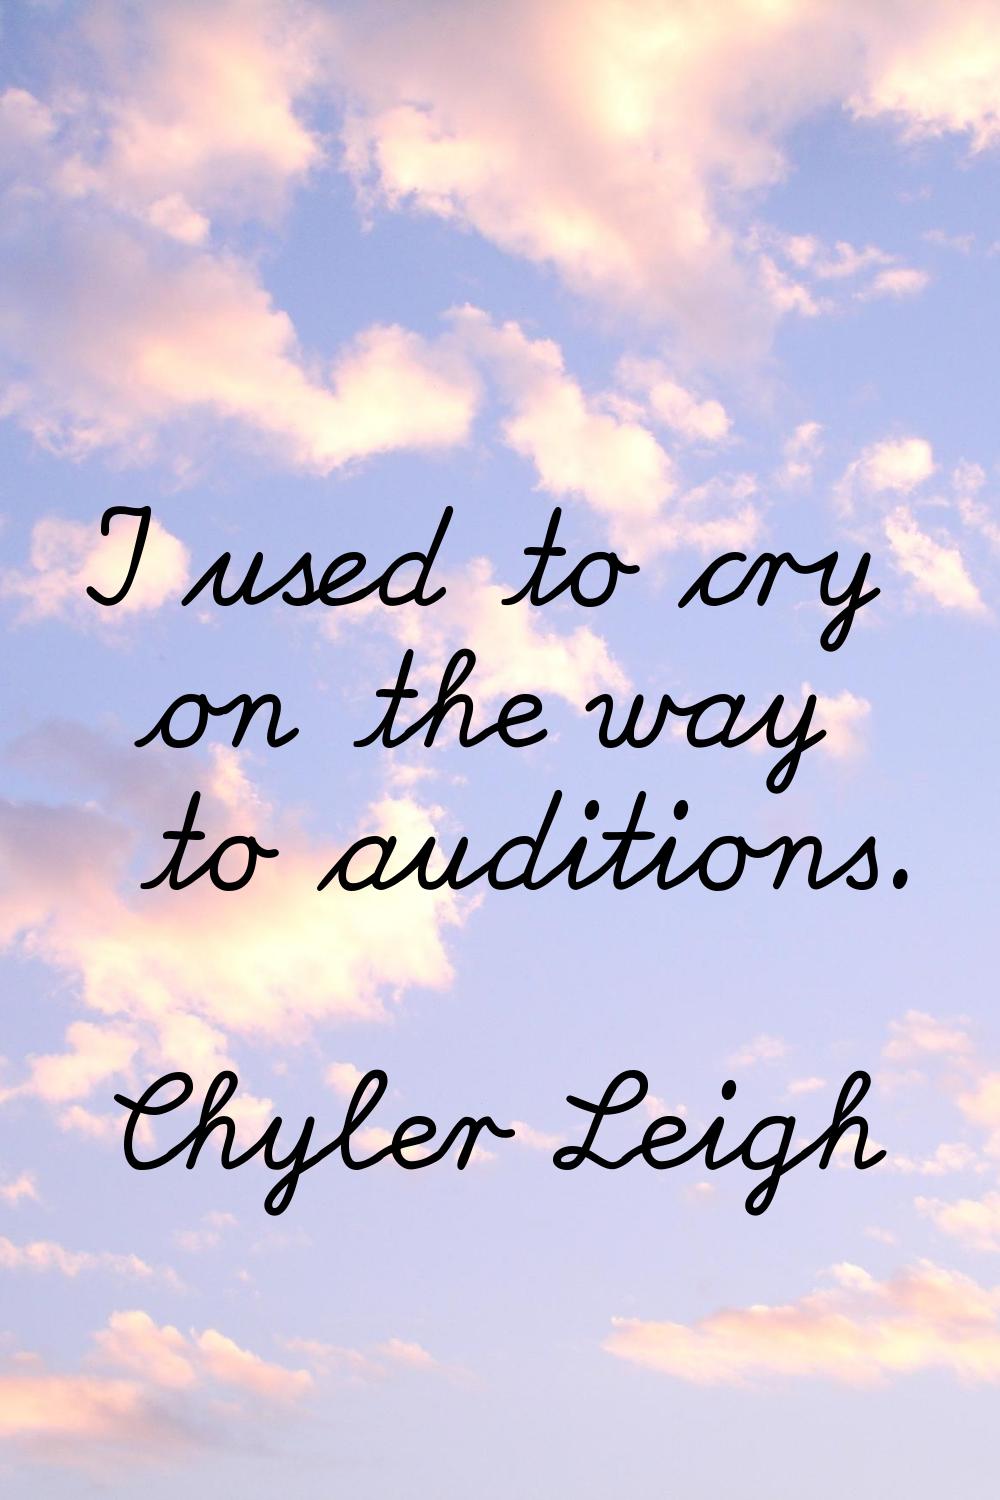 I used to cry on the way to auditions.